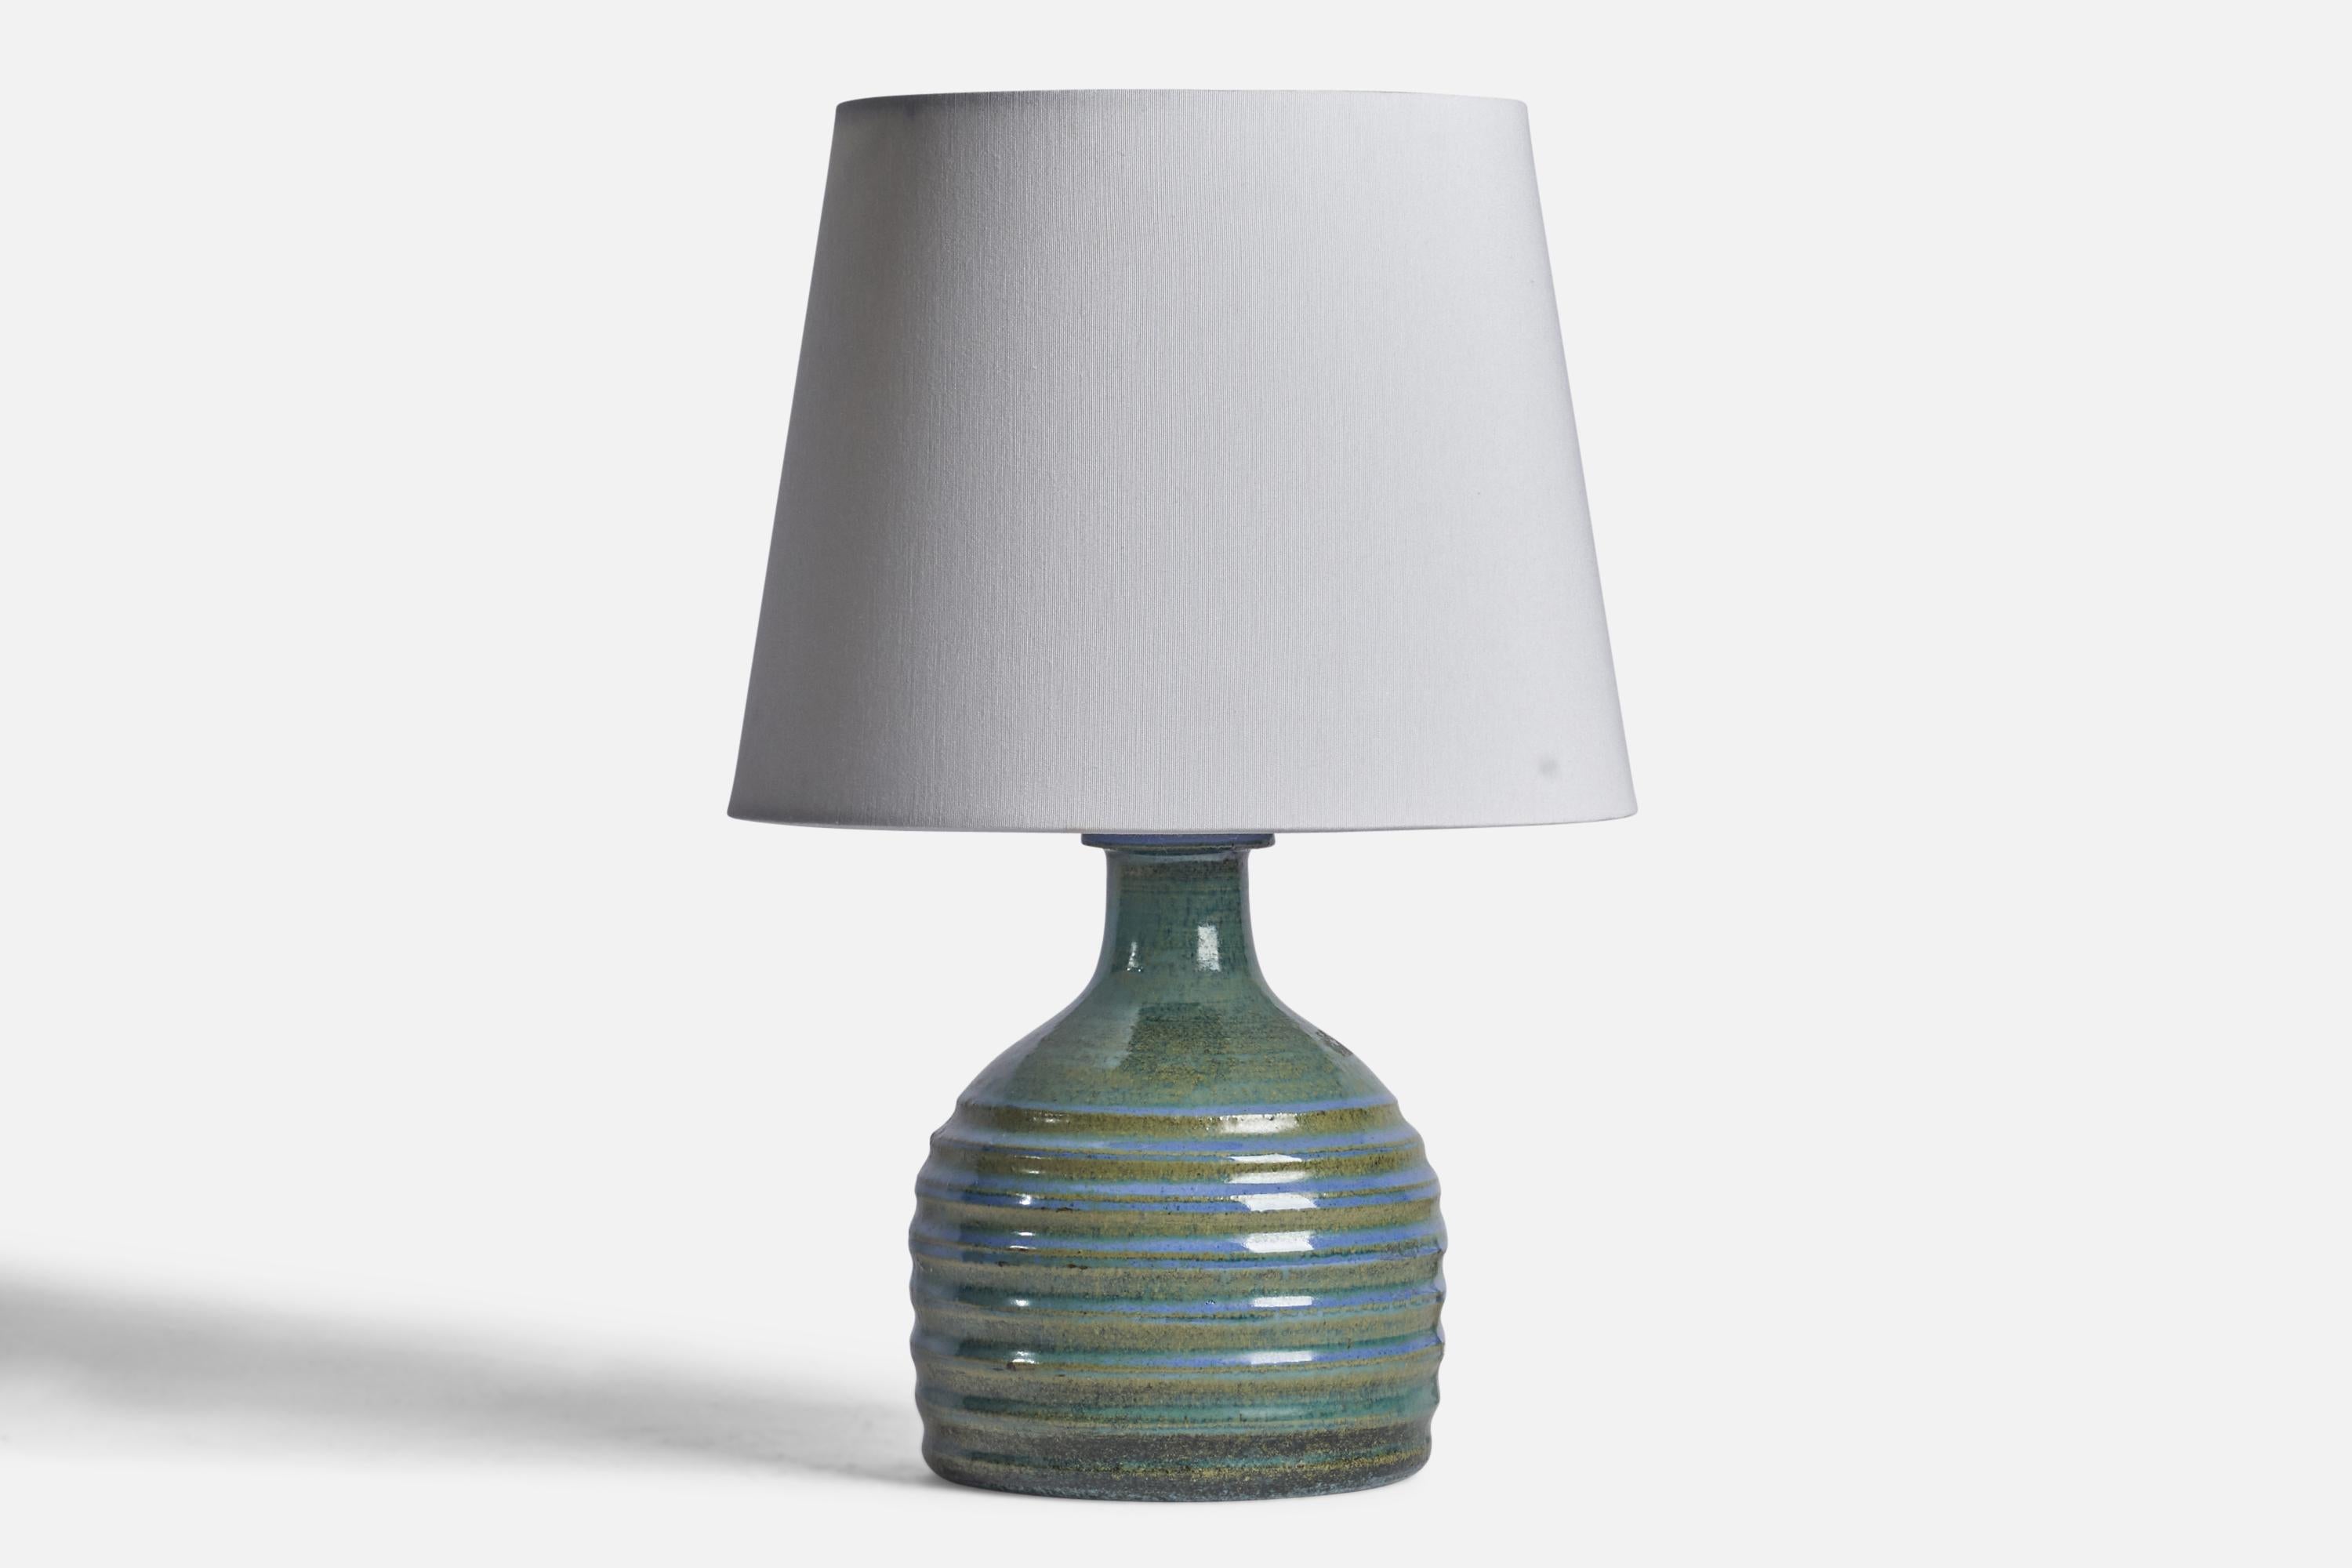 A blue-glazed and incised stoneware table lamp designed by Sven Wejsfelt and produced by Gustavsberg, Sweden, 1974.

Dimensions of Lamp (inches): 9.75” H x 6” Diameter
Dimensions of Shade (inches): 7.6” Top Diameter x 10” Bottom Diameter x 8”